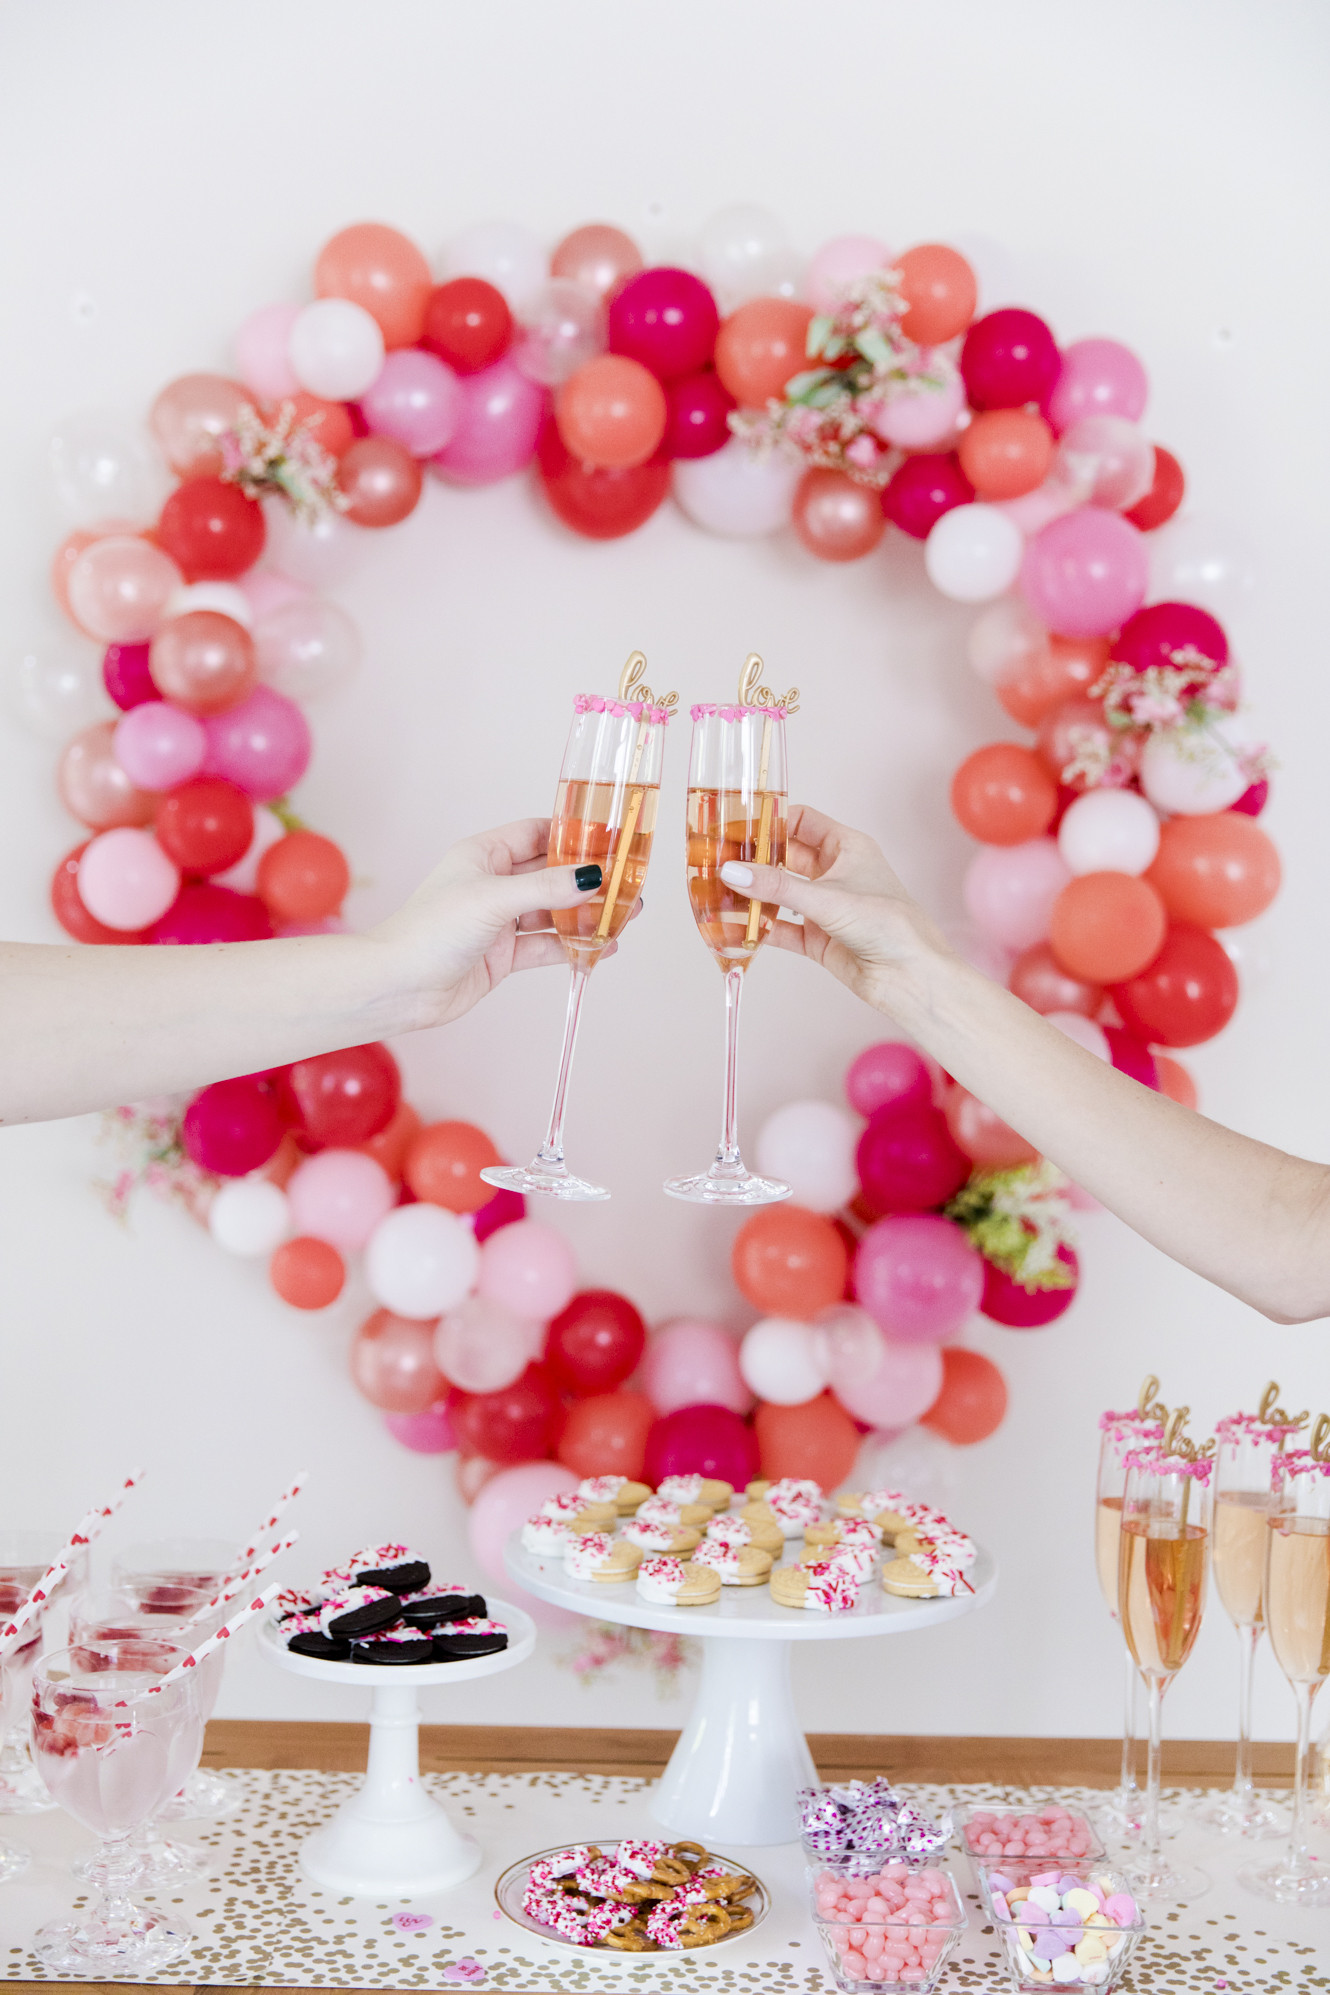 Best Valentines Day Ideas
 Six Ideas for throwing the Best Valentine s Day Party